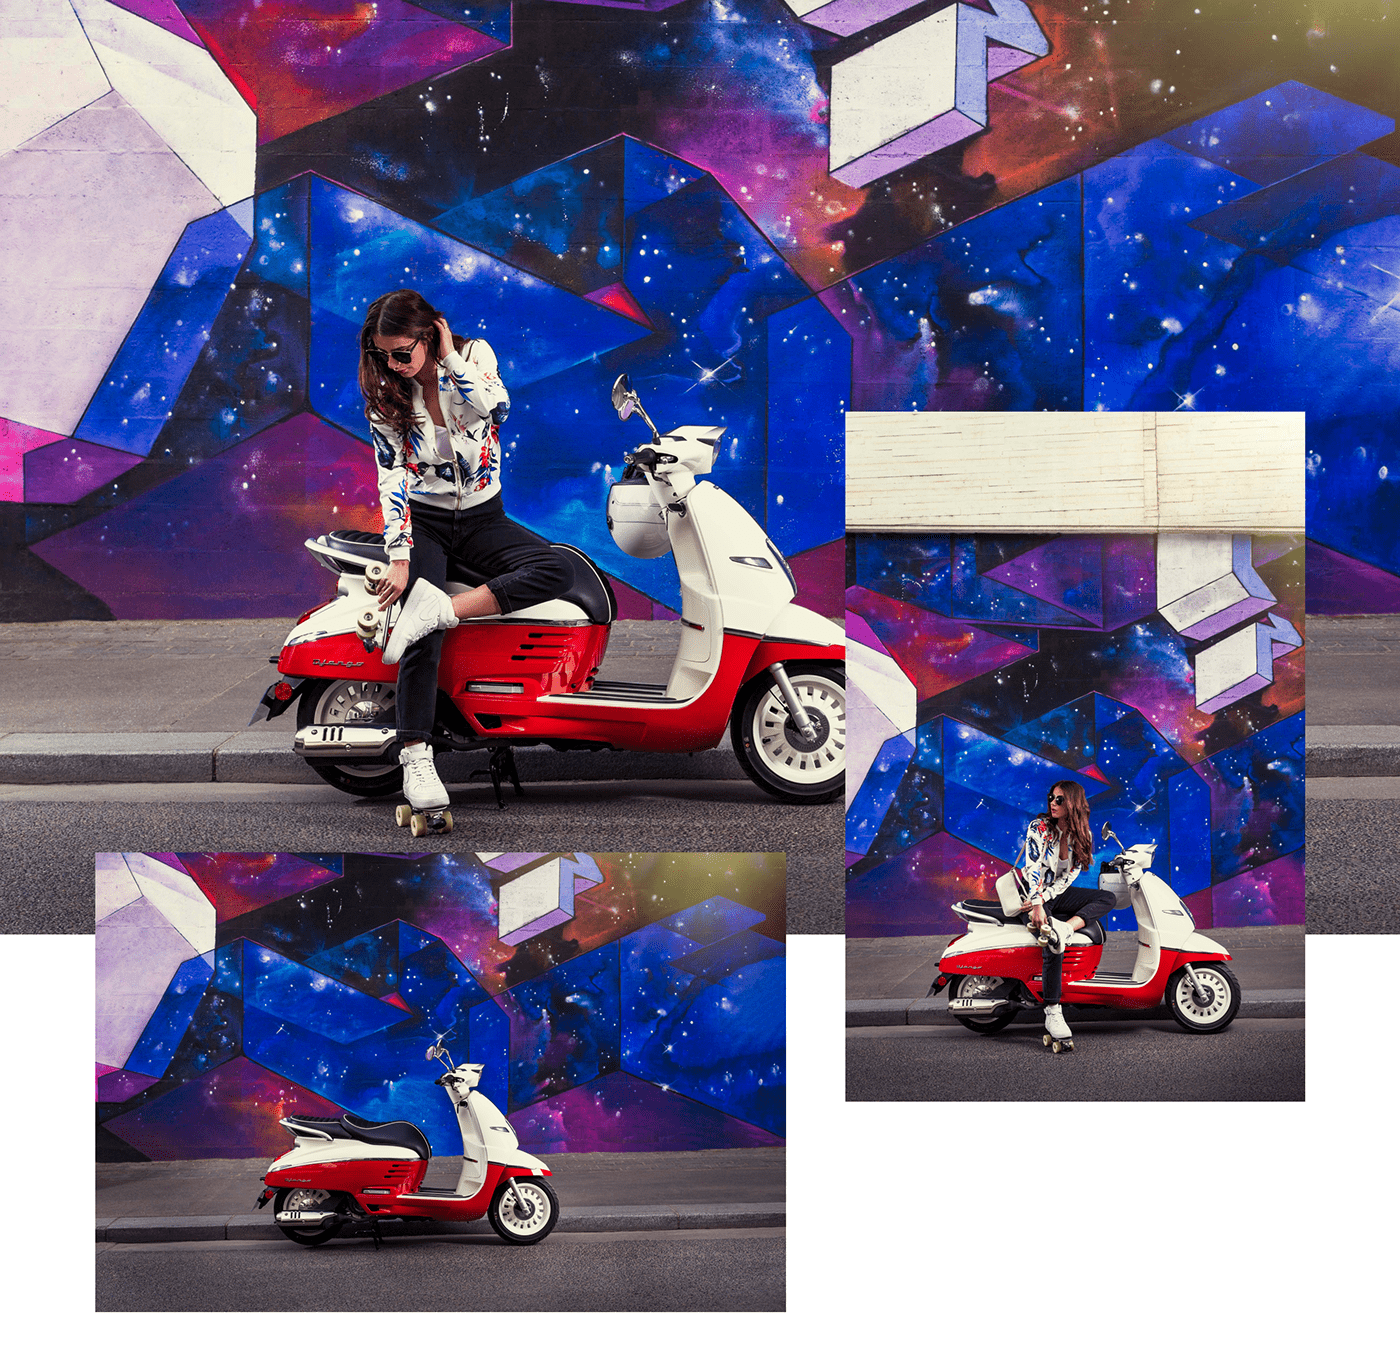 city French Keyvisual motocycle PEUGEOT rough Scooter shooting Socialmedia Urban